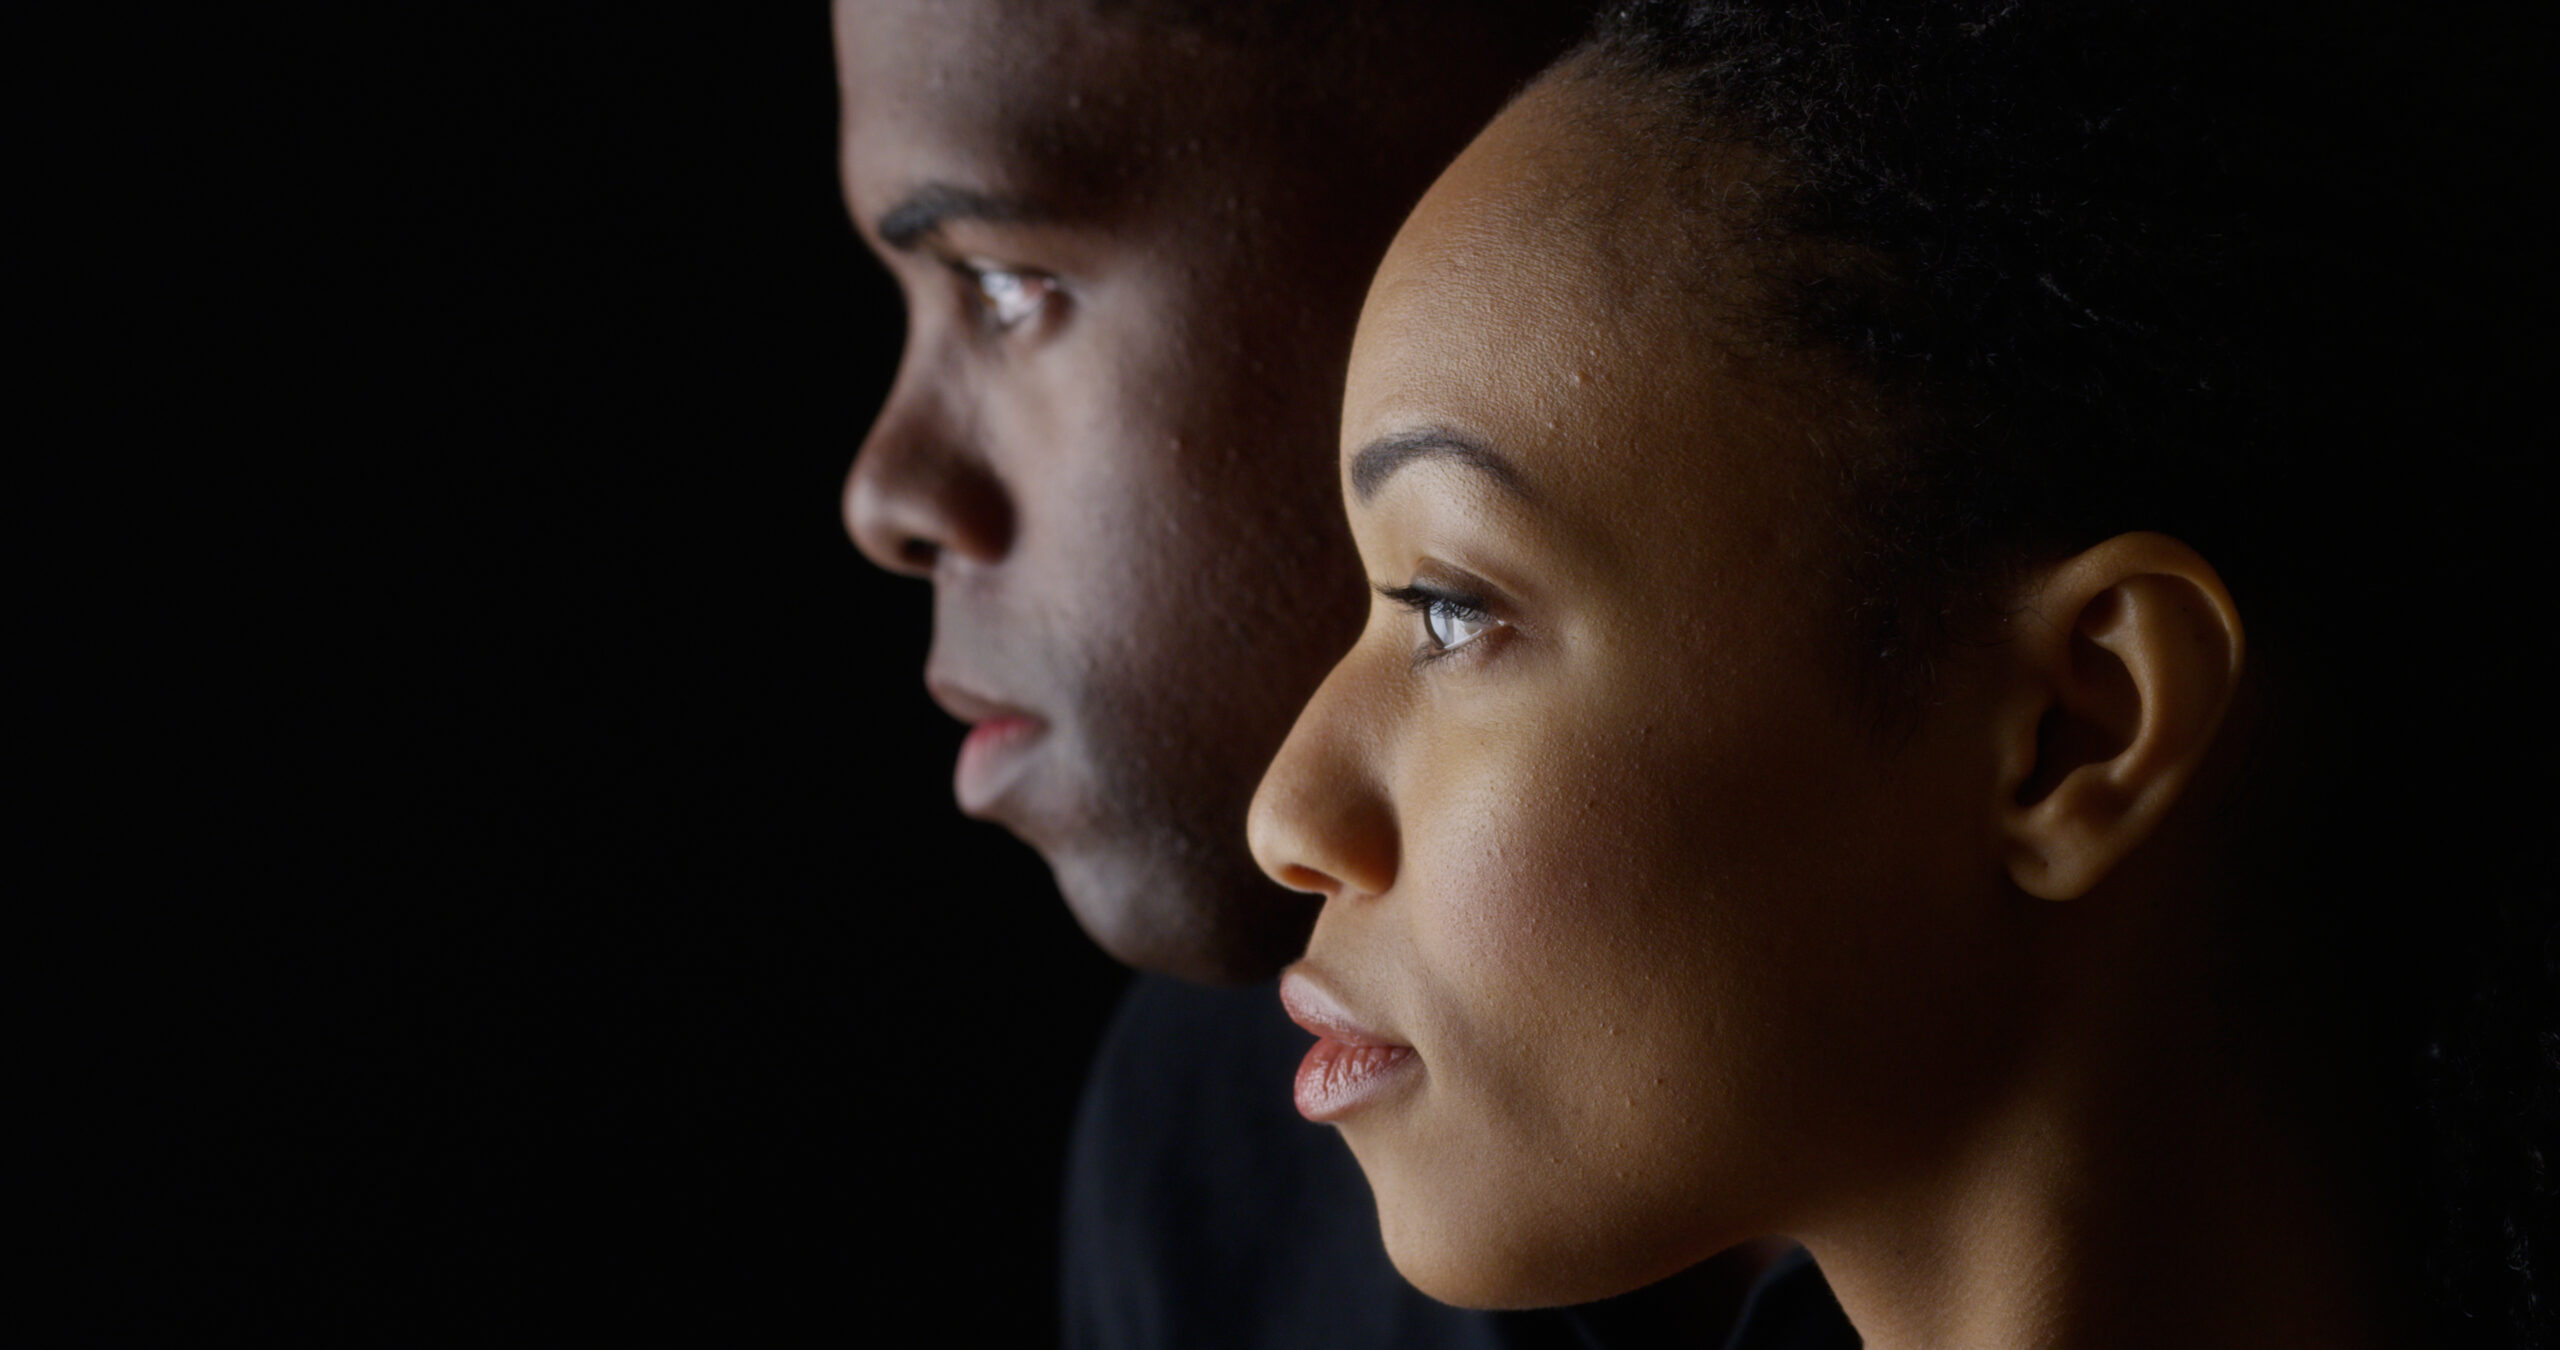 Featured image for “Suicide Among Black Young Adults: Self-Acceptance as a Protective Factor”